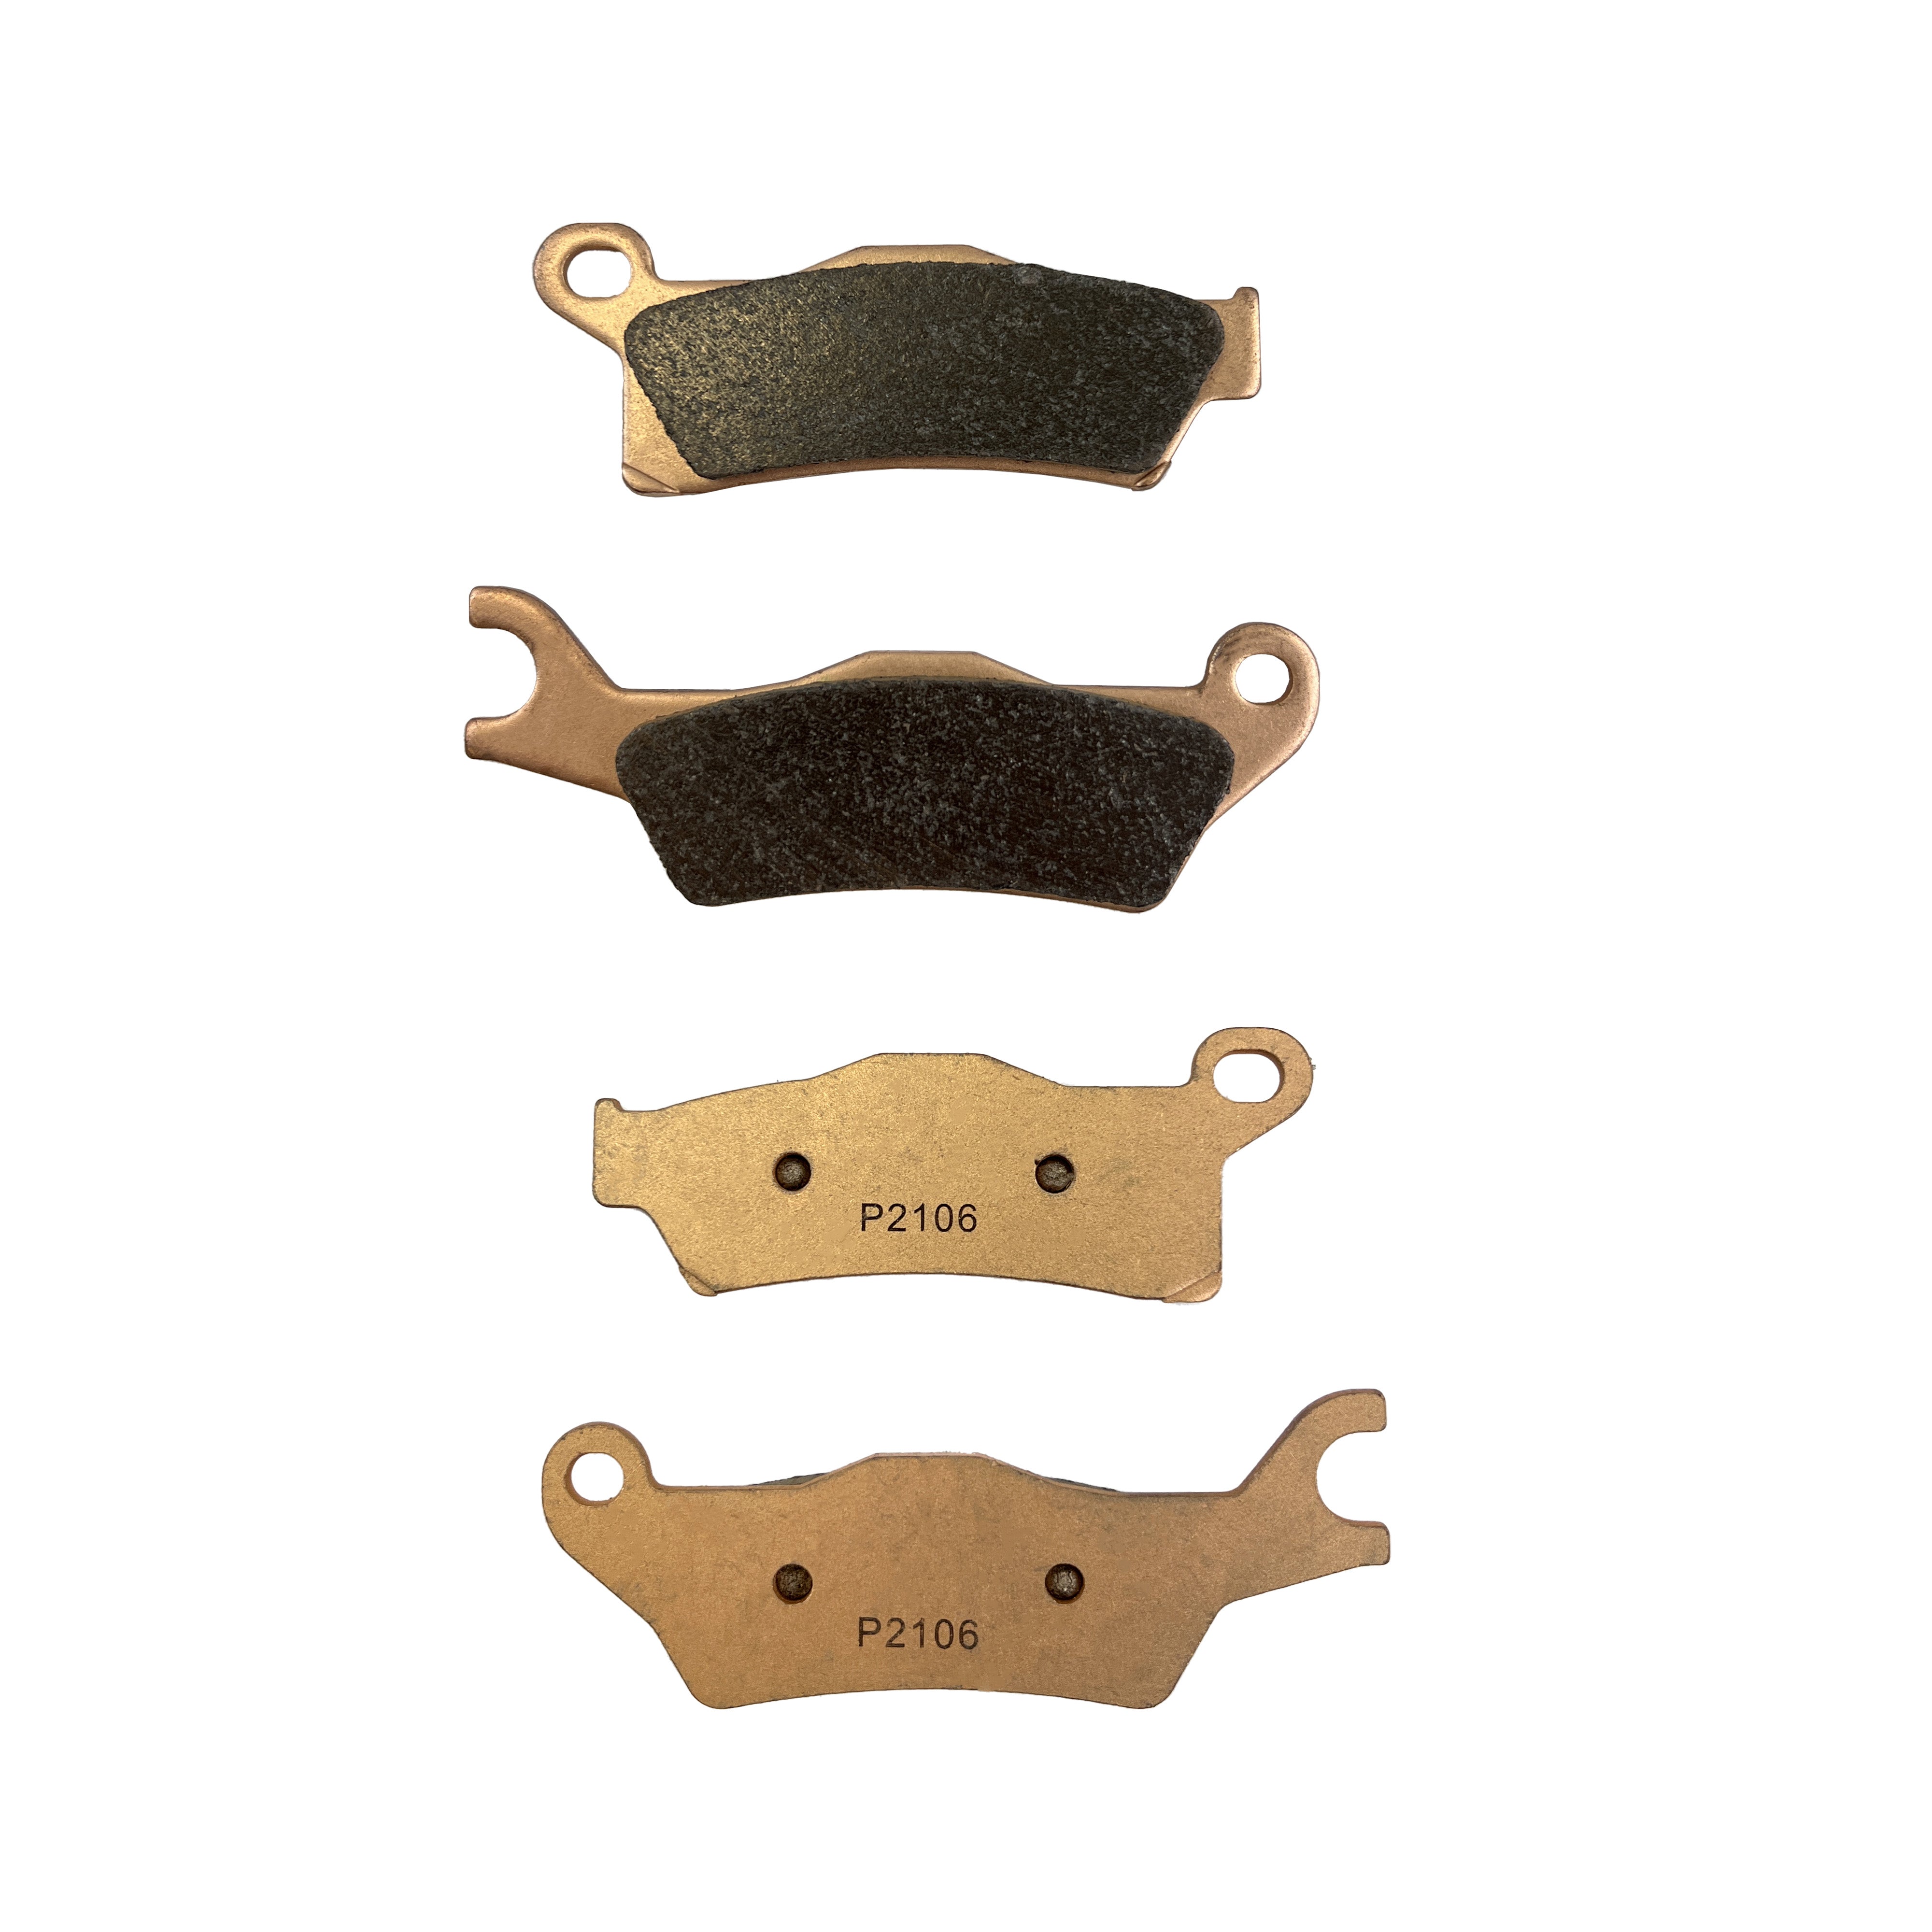 Sintered Brake Pads for Can Am Renegade 650 